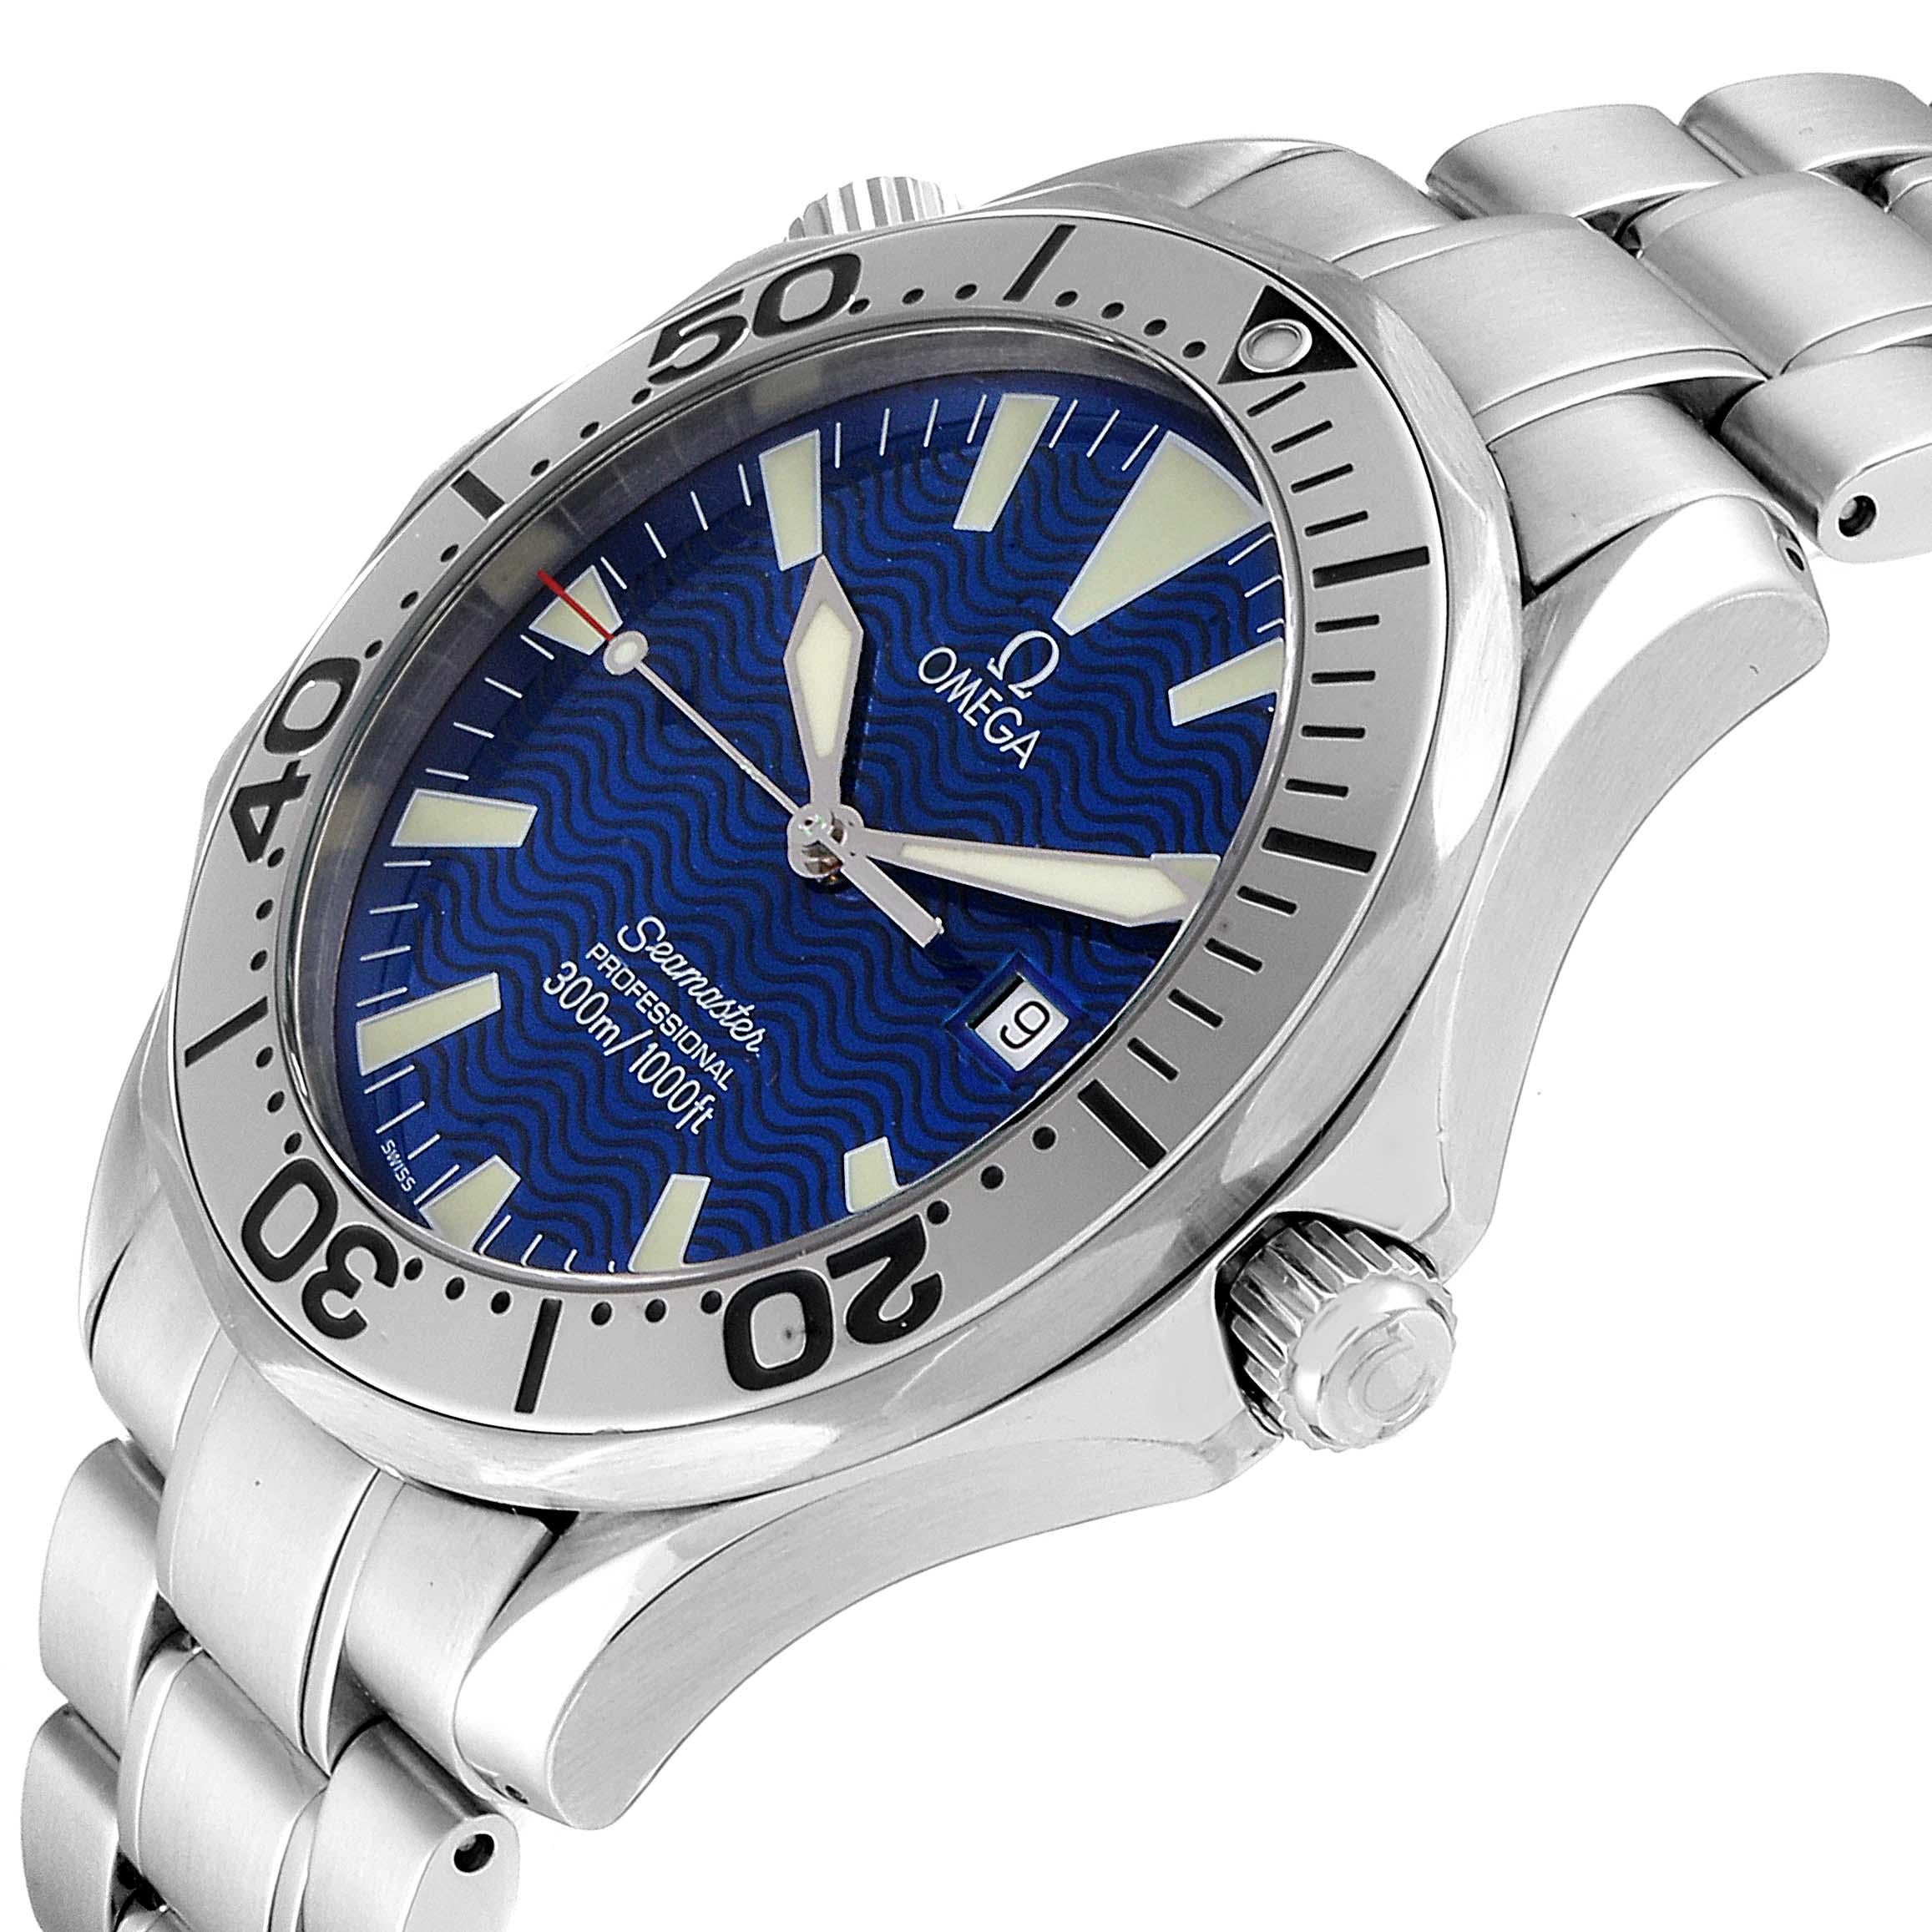 Omega Seamaster Electric Blue Wave Dial Men's Watch 2265.80.00 2